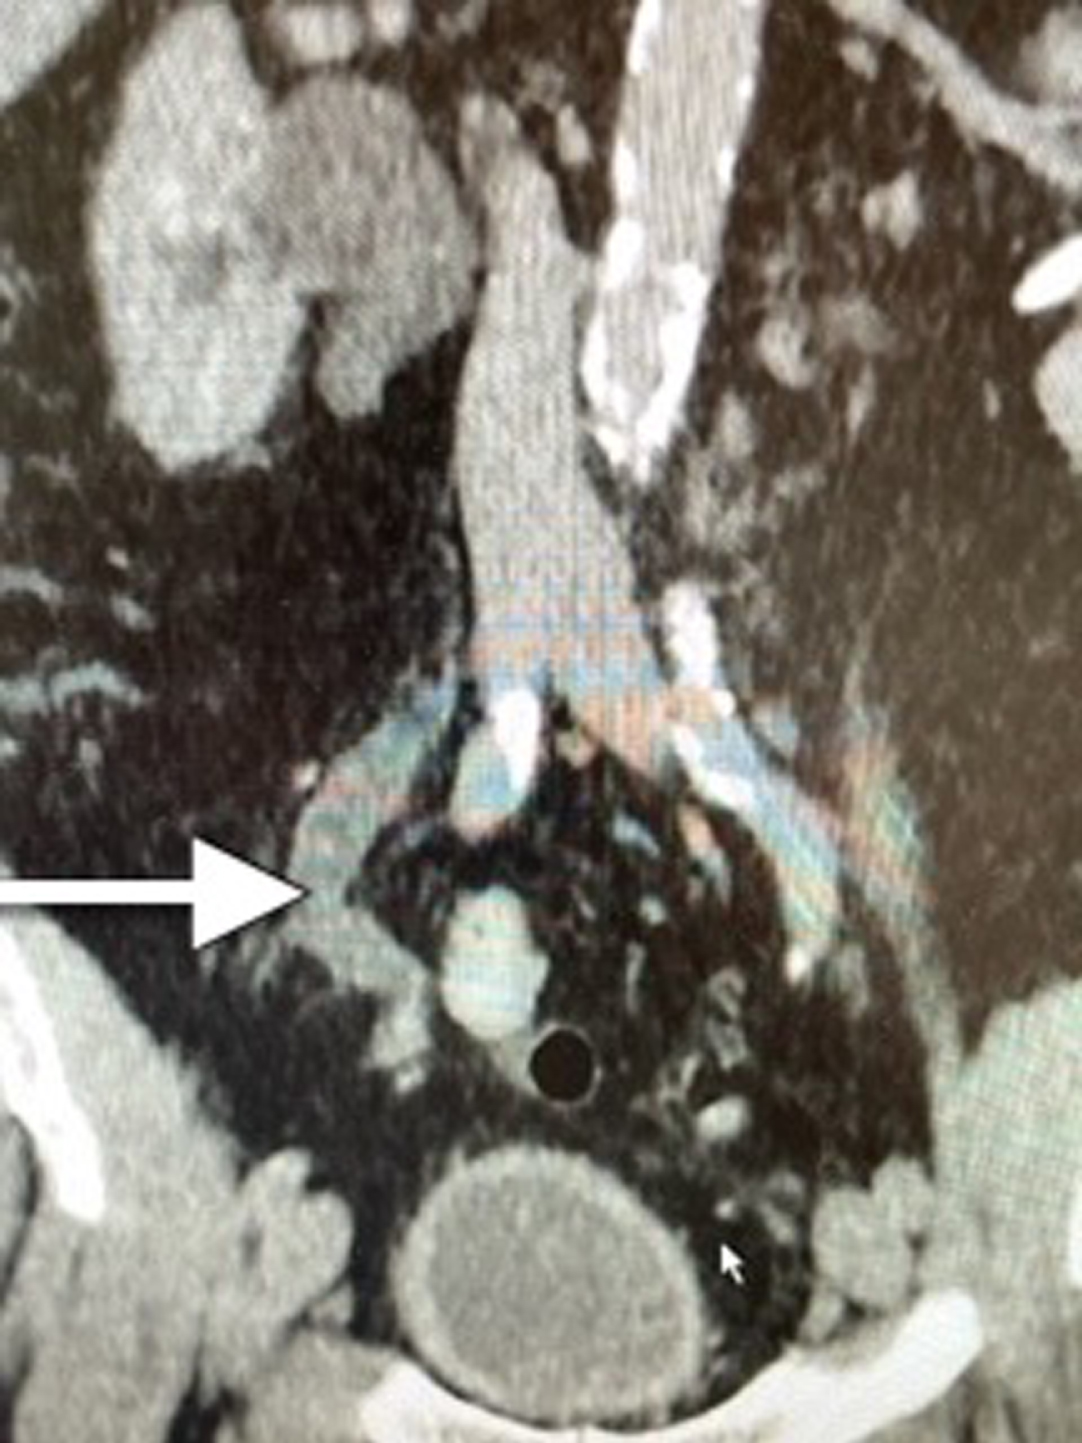 CT scan indicating dilated/obstructed right ureter identified by the arrow.